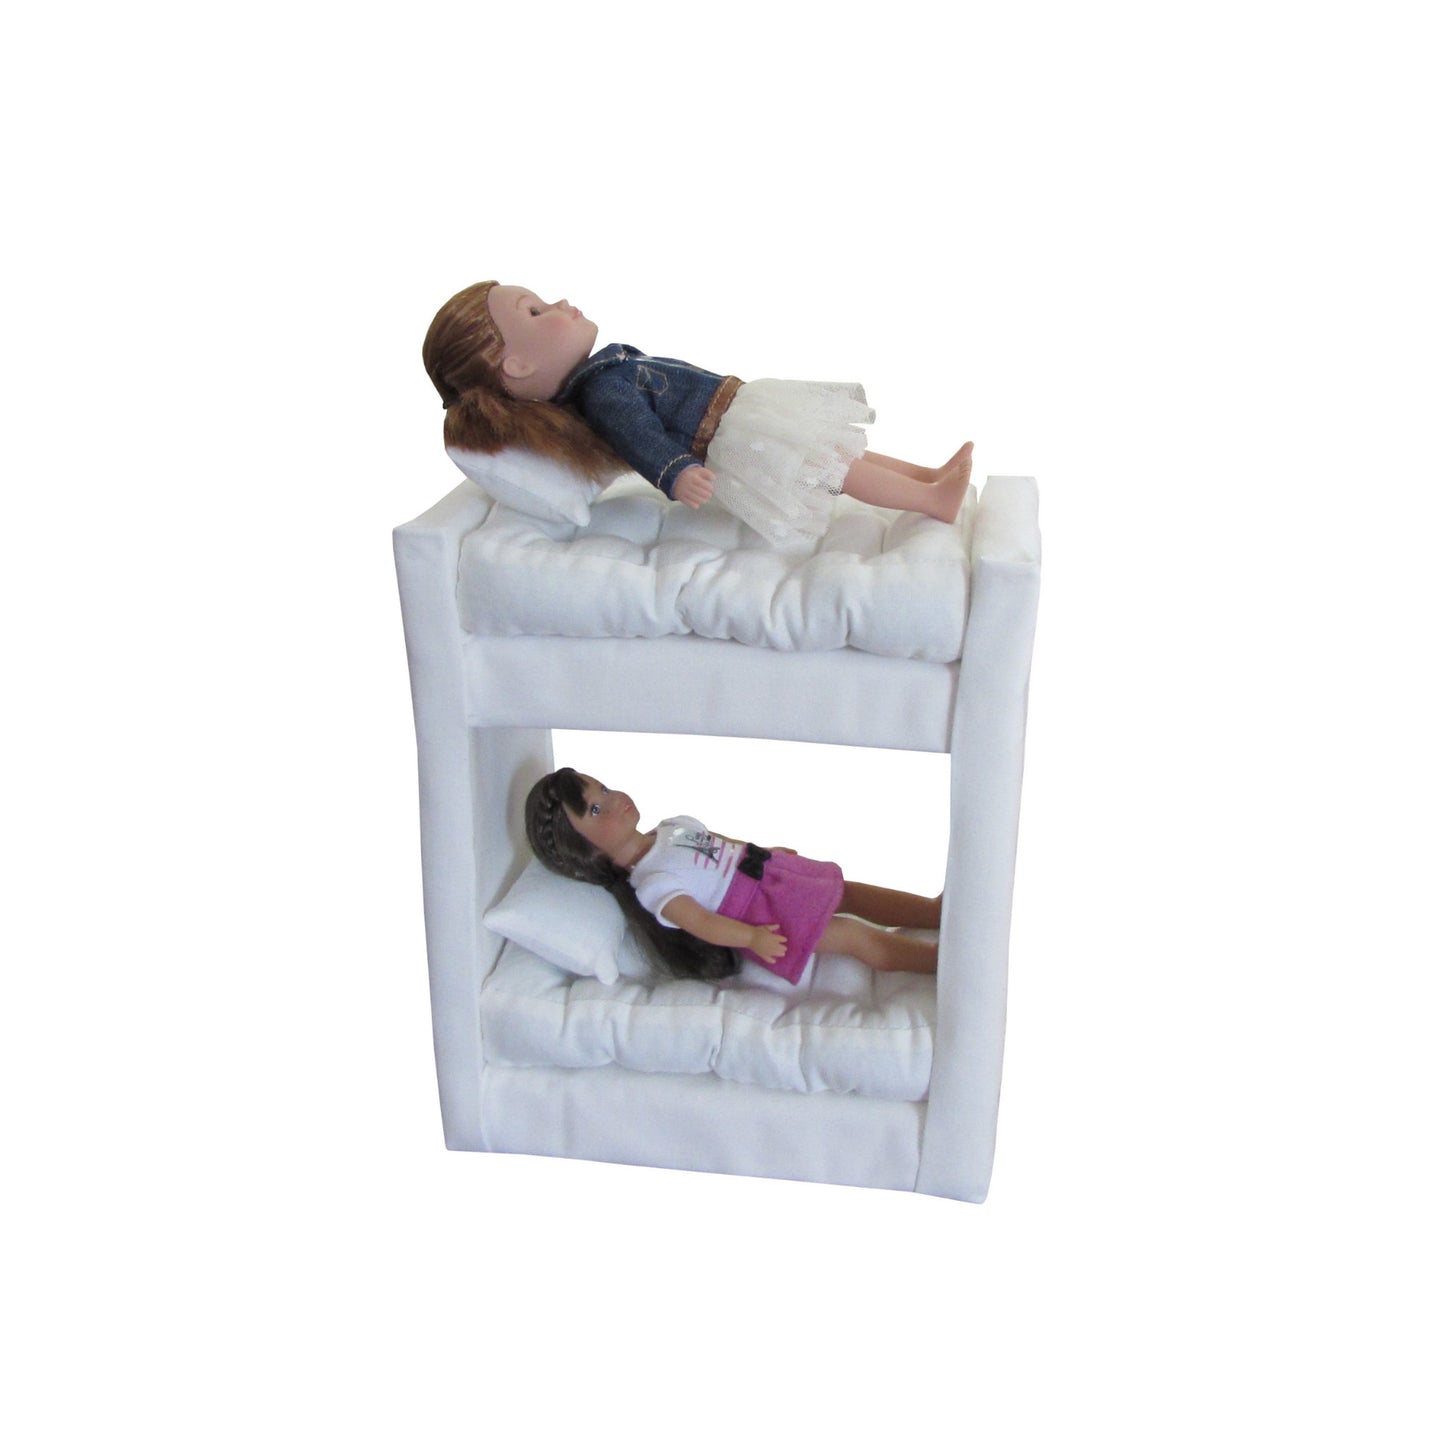 Upholstered White Doll Bunk Bed for 6.5-inch dolls with dolls